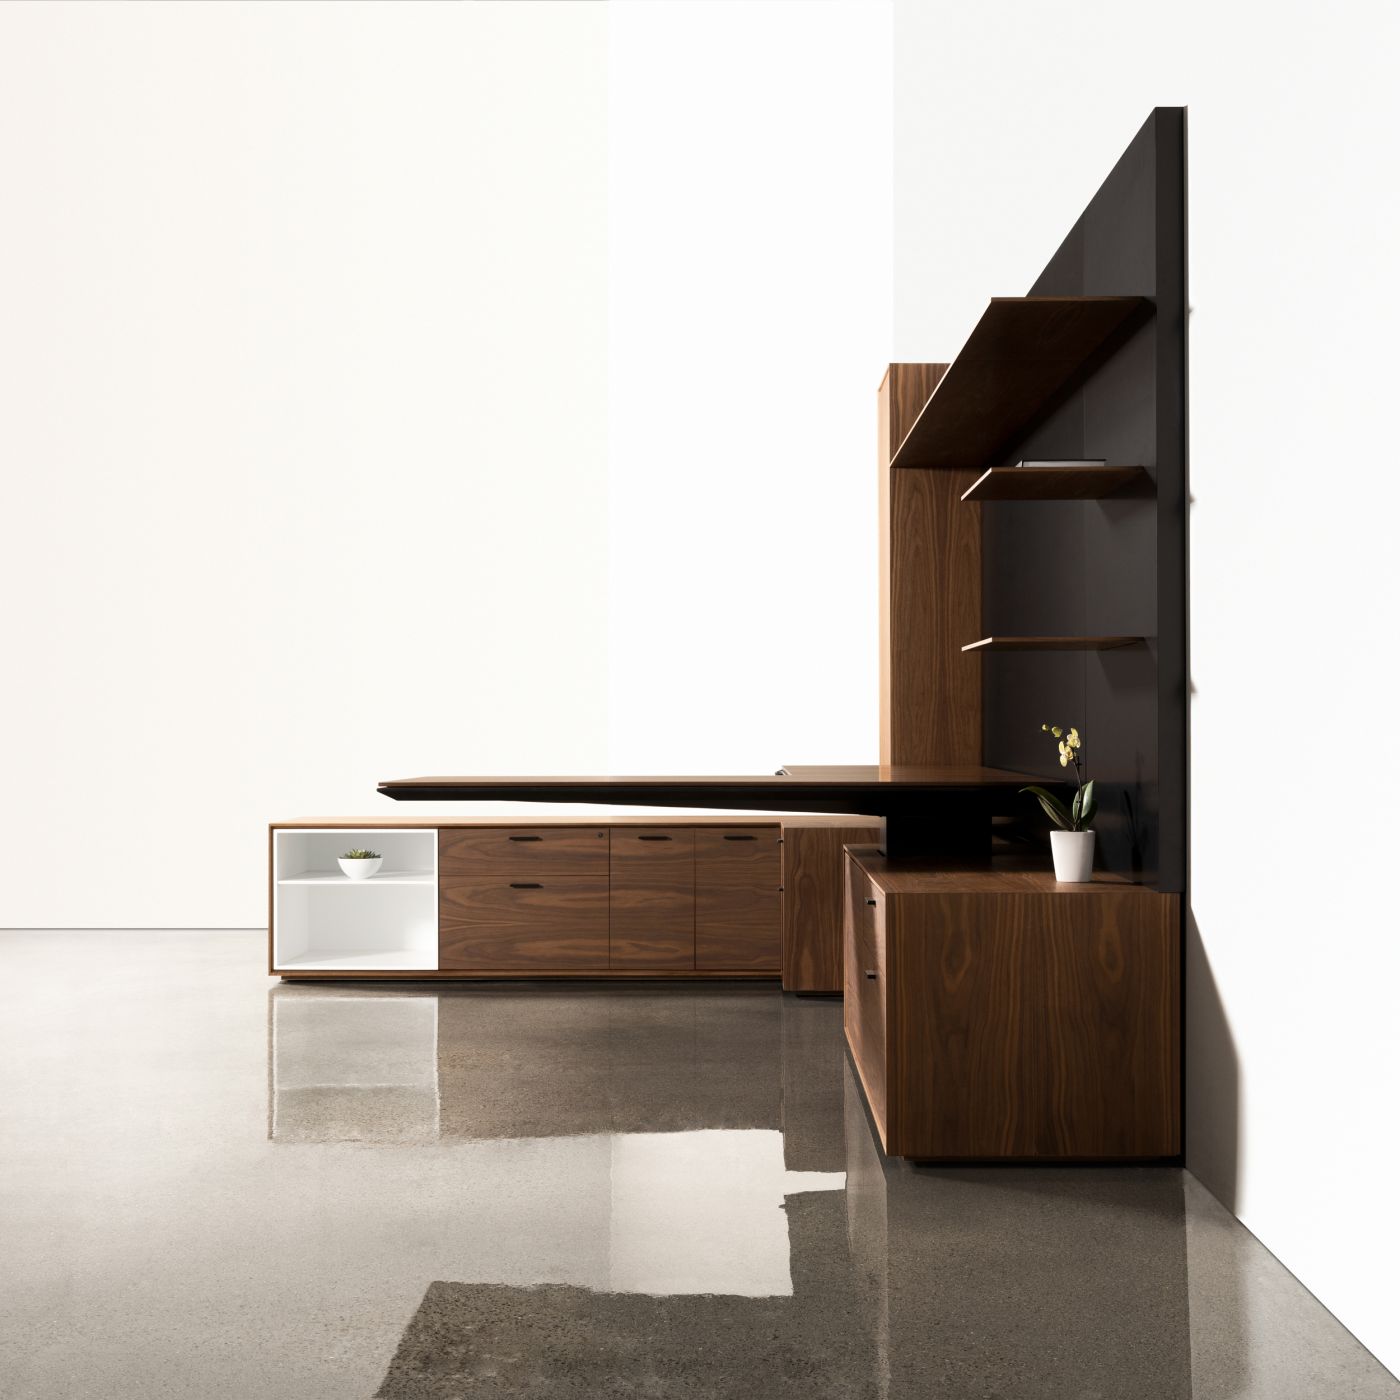 Elevate your space with Halo office's elegant lines and crisp aesthetics.